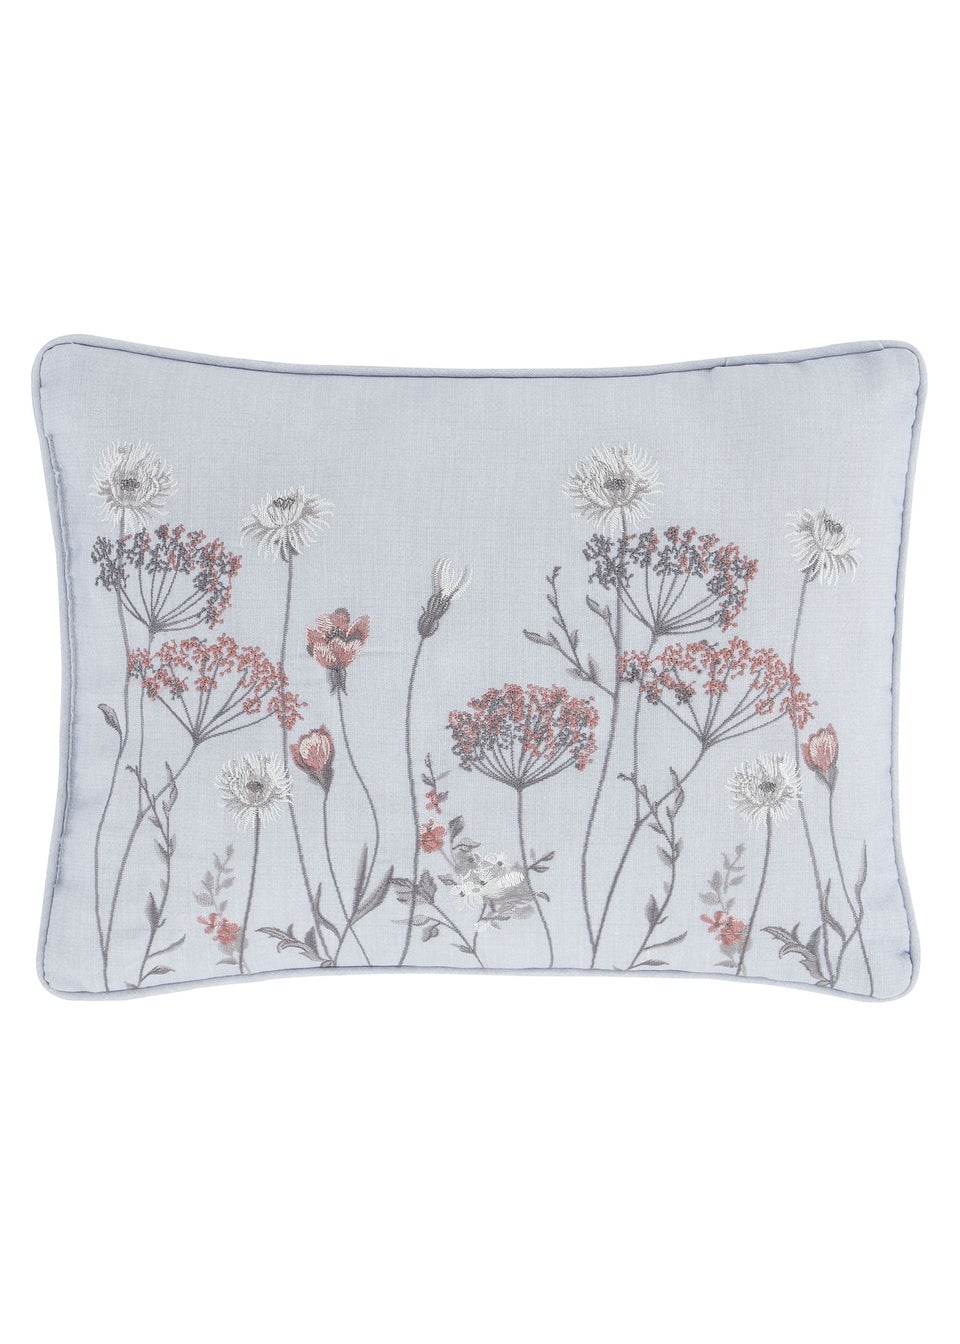 Catherine Lansfield Meadowsweet Floral Embroidered Cushion (30x40cm)